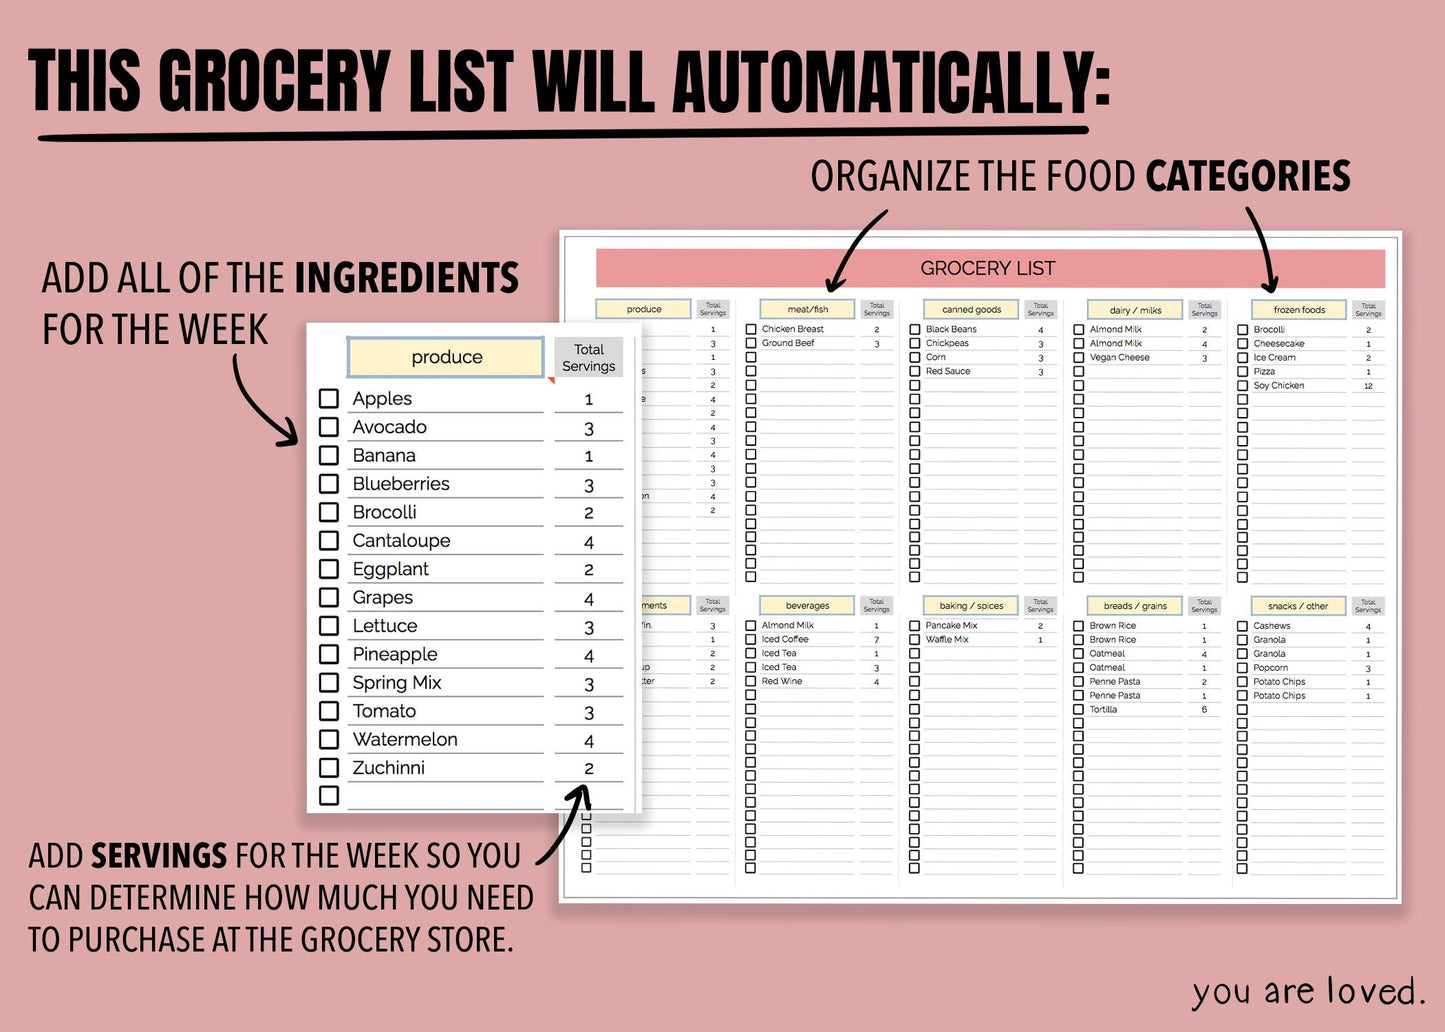 Meal Planner & AUTOMATED Grocery List | GOOGLE SHEETS